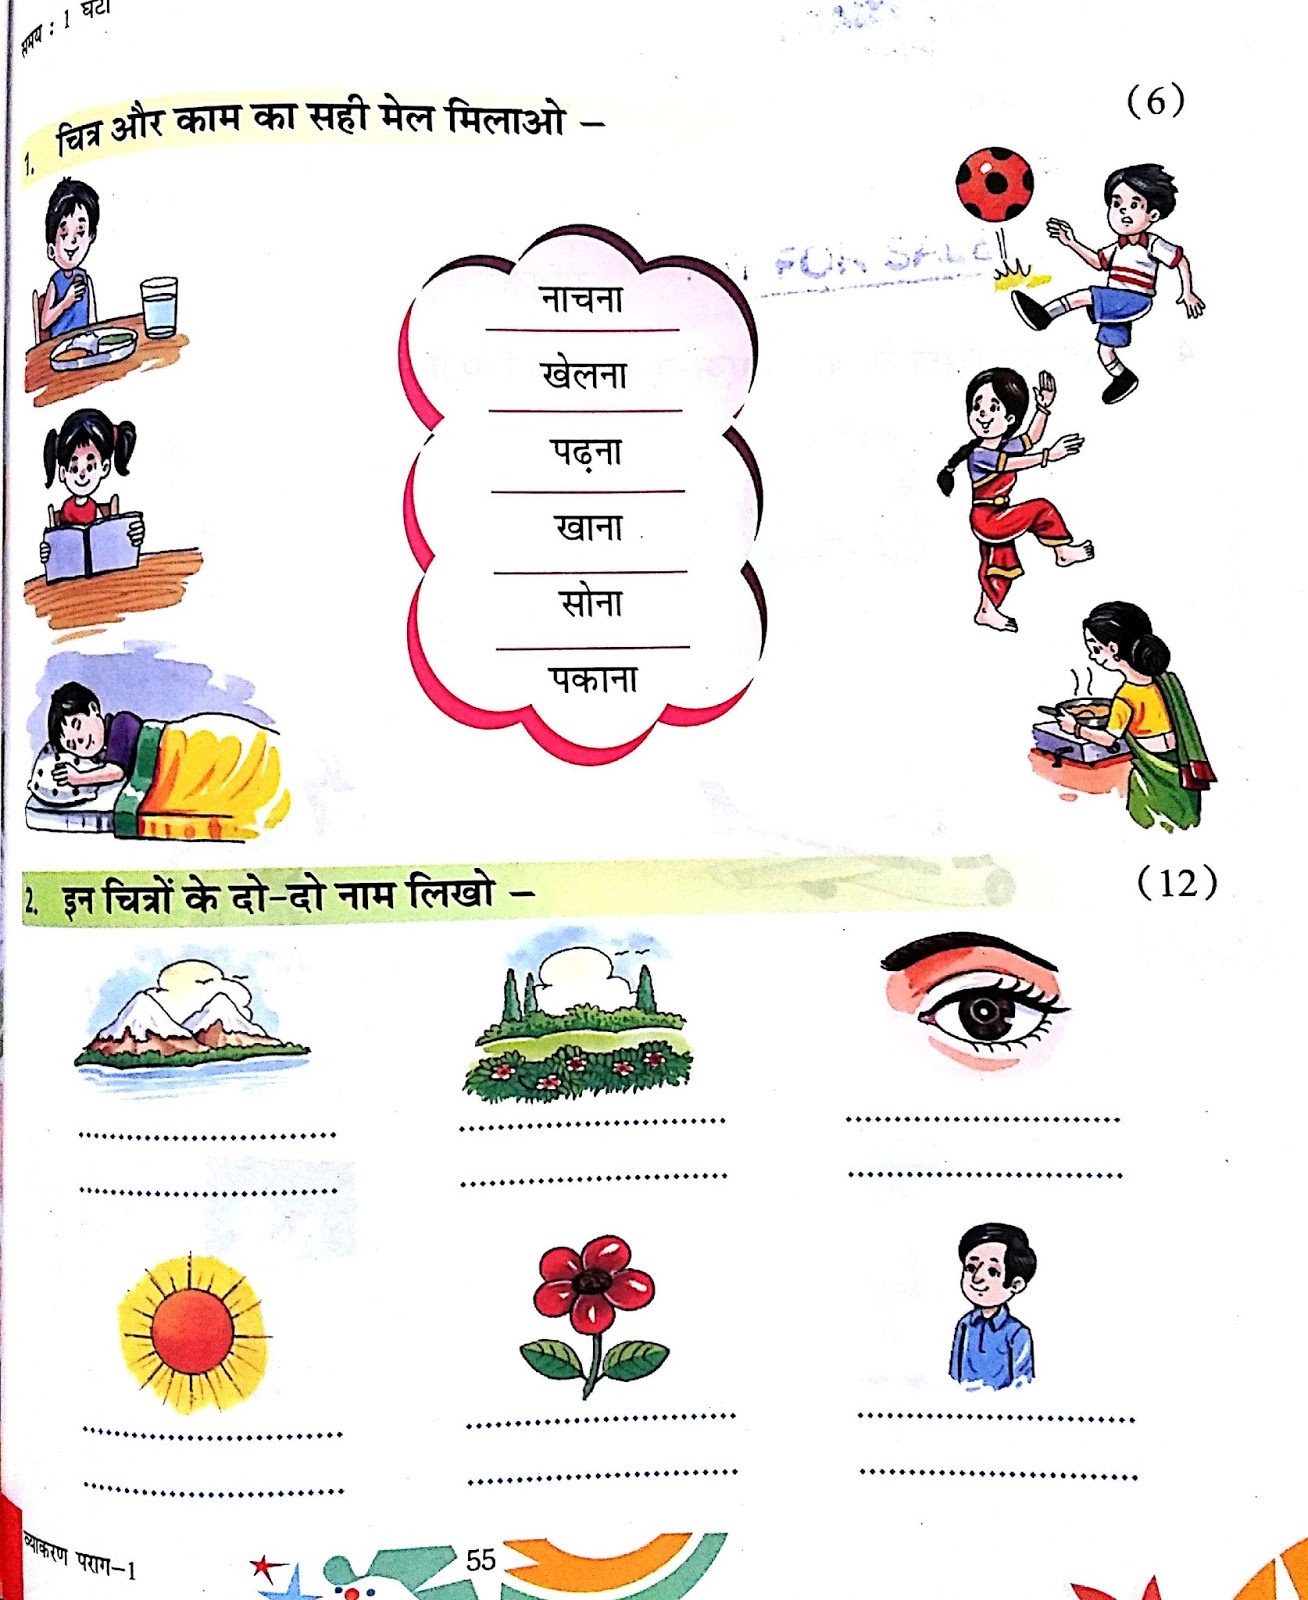 Hindi Grammar Work Sheet Collection for Classes 5,6, 7 & 8 ...